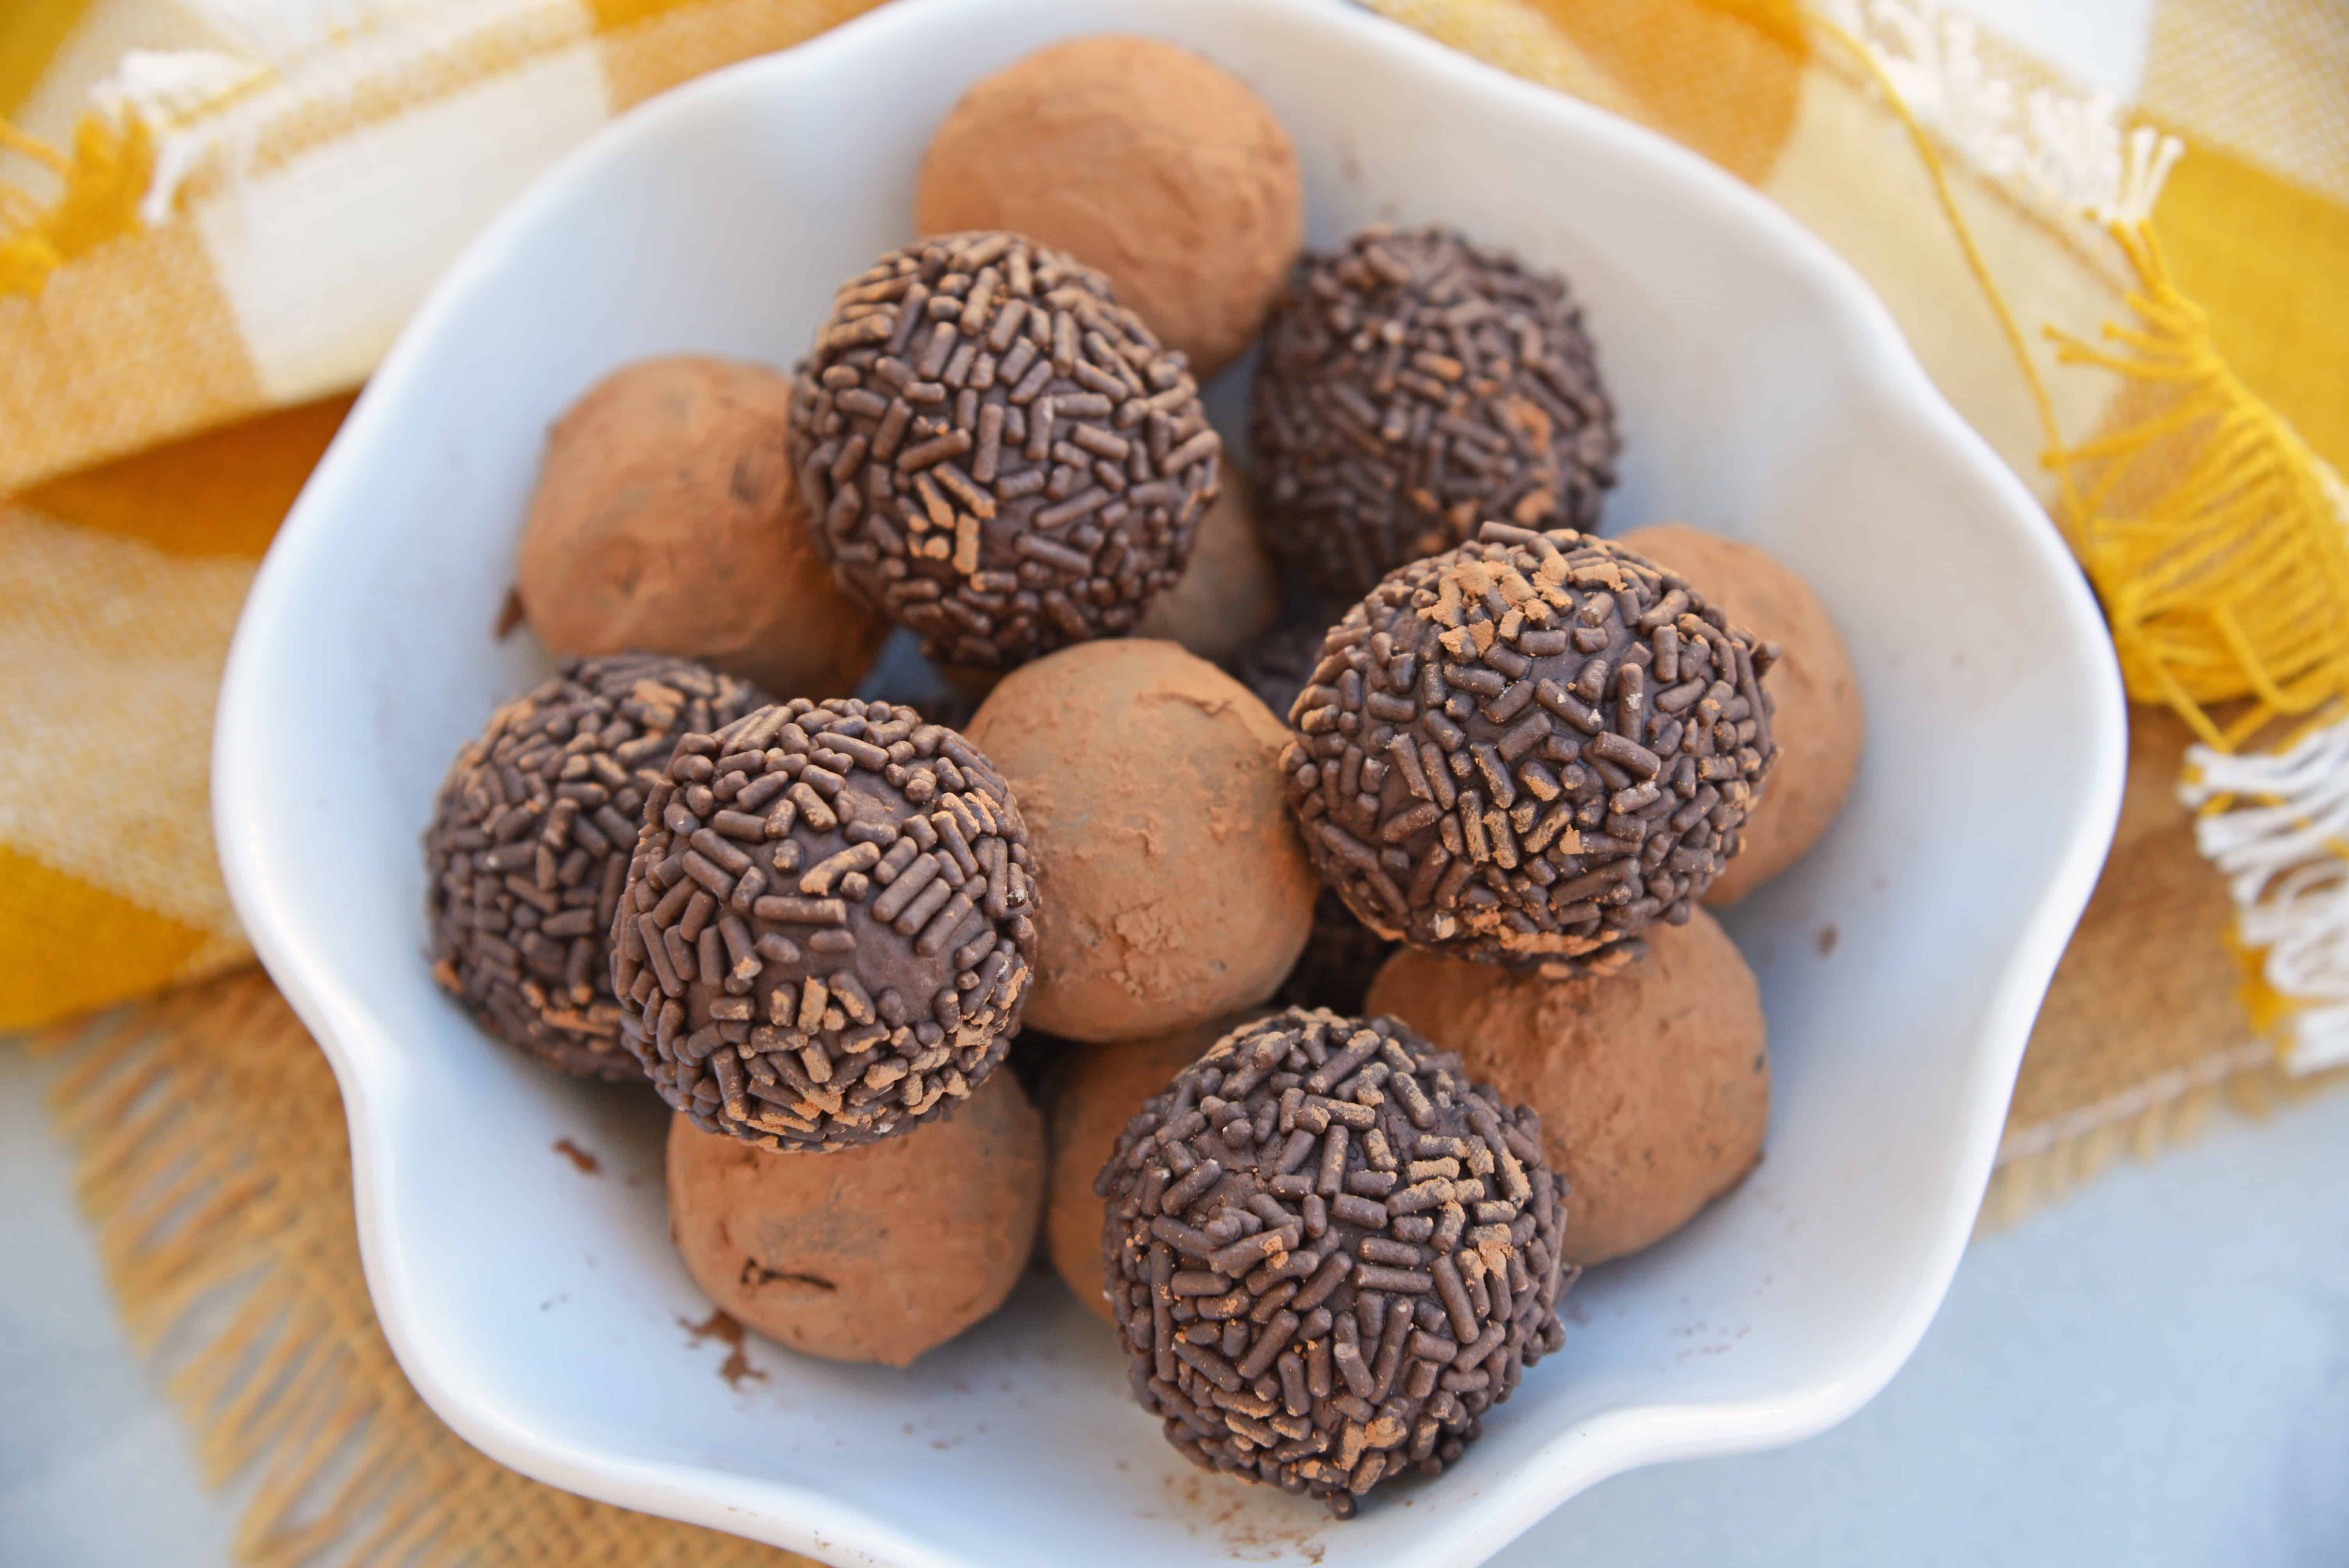 Easy Chocolate Truffles only use 4 ingredients, including sweetened condensed milk, to make a rich, decadent dessert. Roll them in chocolate sprinkles, powdered sugar or cocoa for the the finished touch! #chocolatetruffles #easytruffles www.savoryexperiments.com 